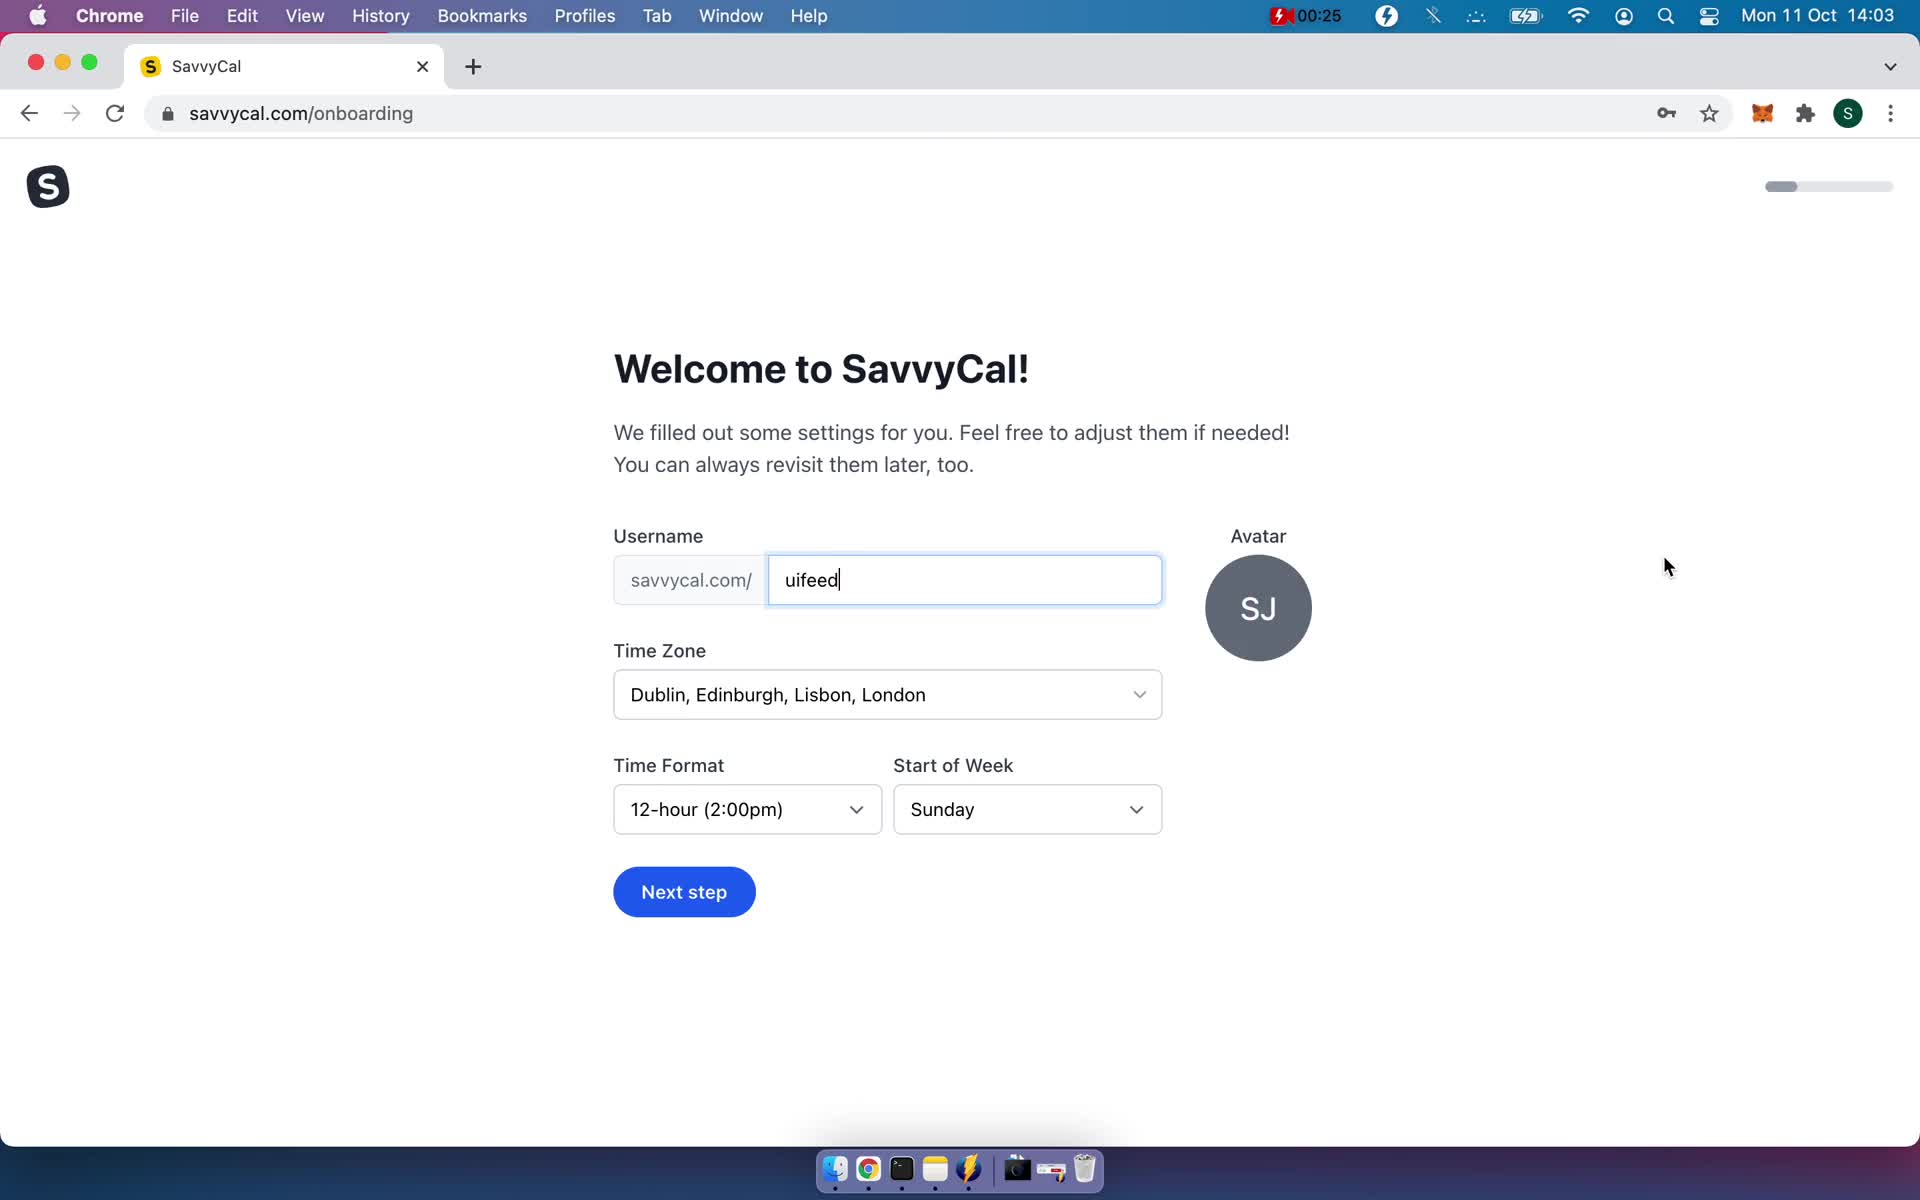 Screenshot of Continue setup on Onboarding on SavvyCal user flow